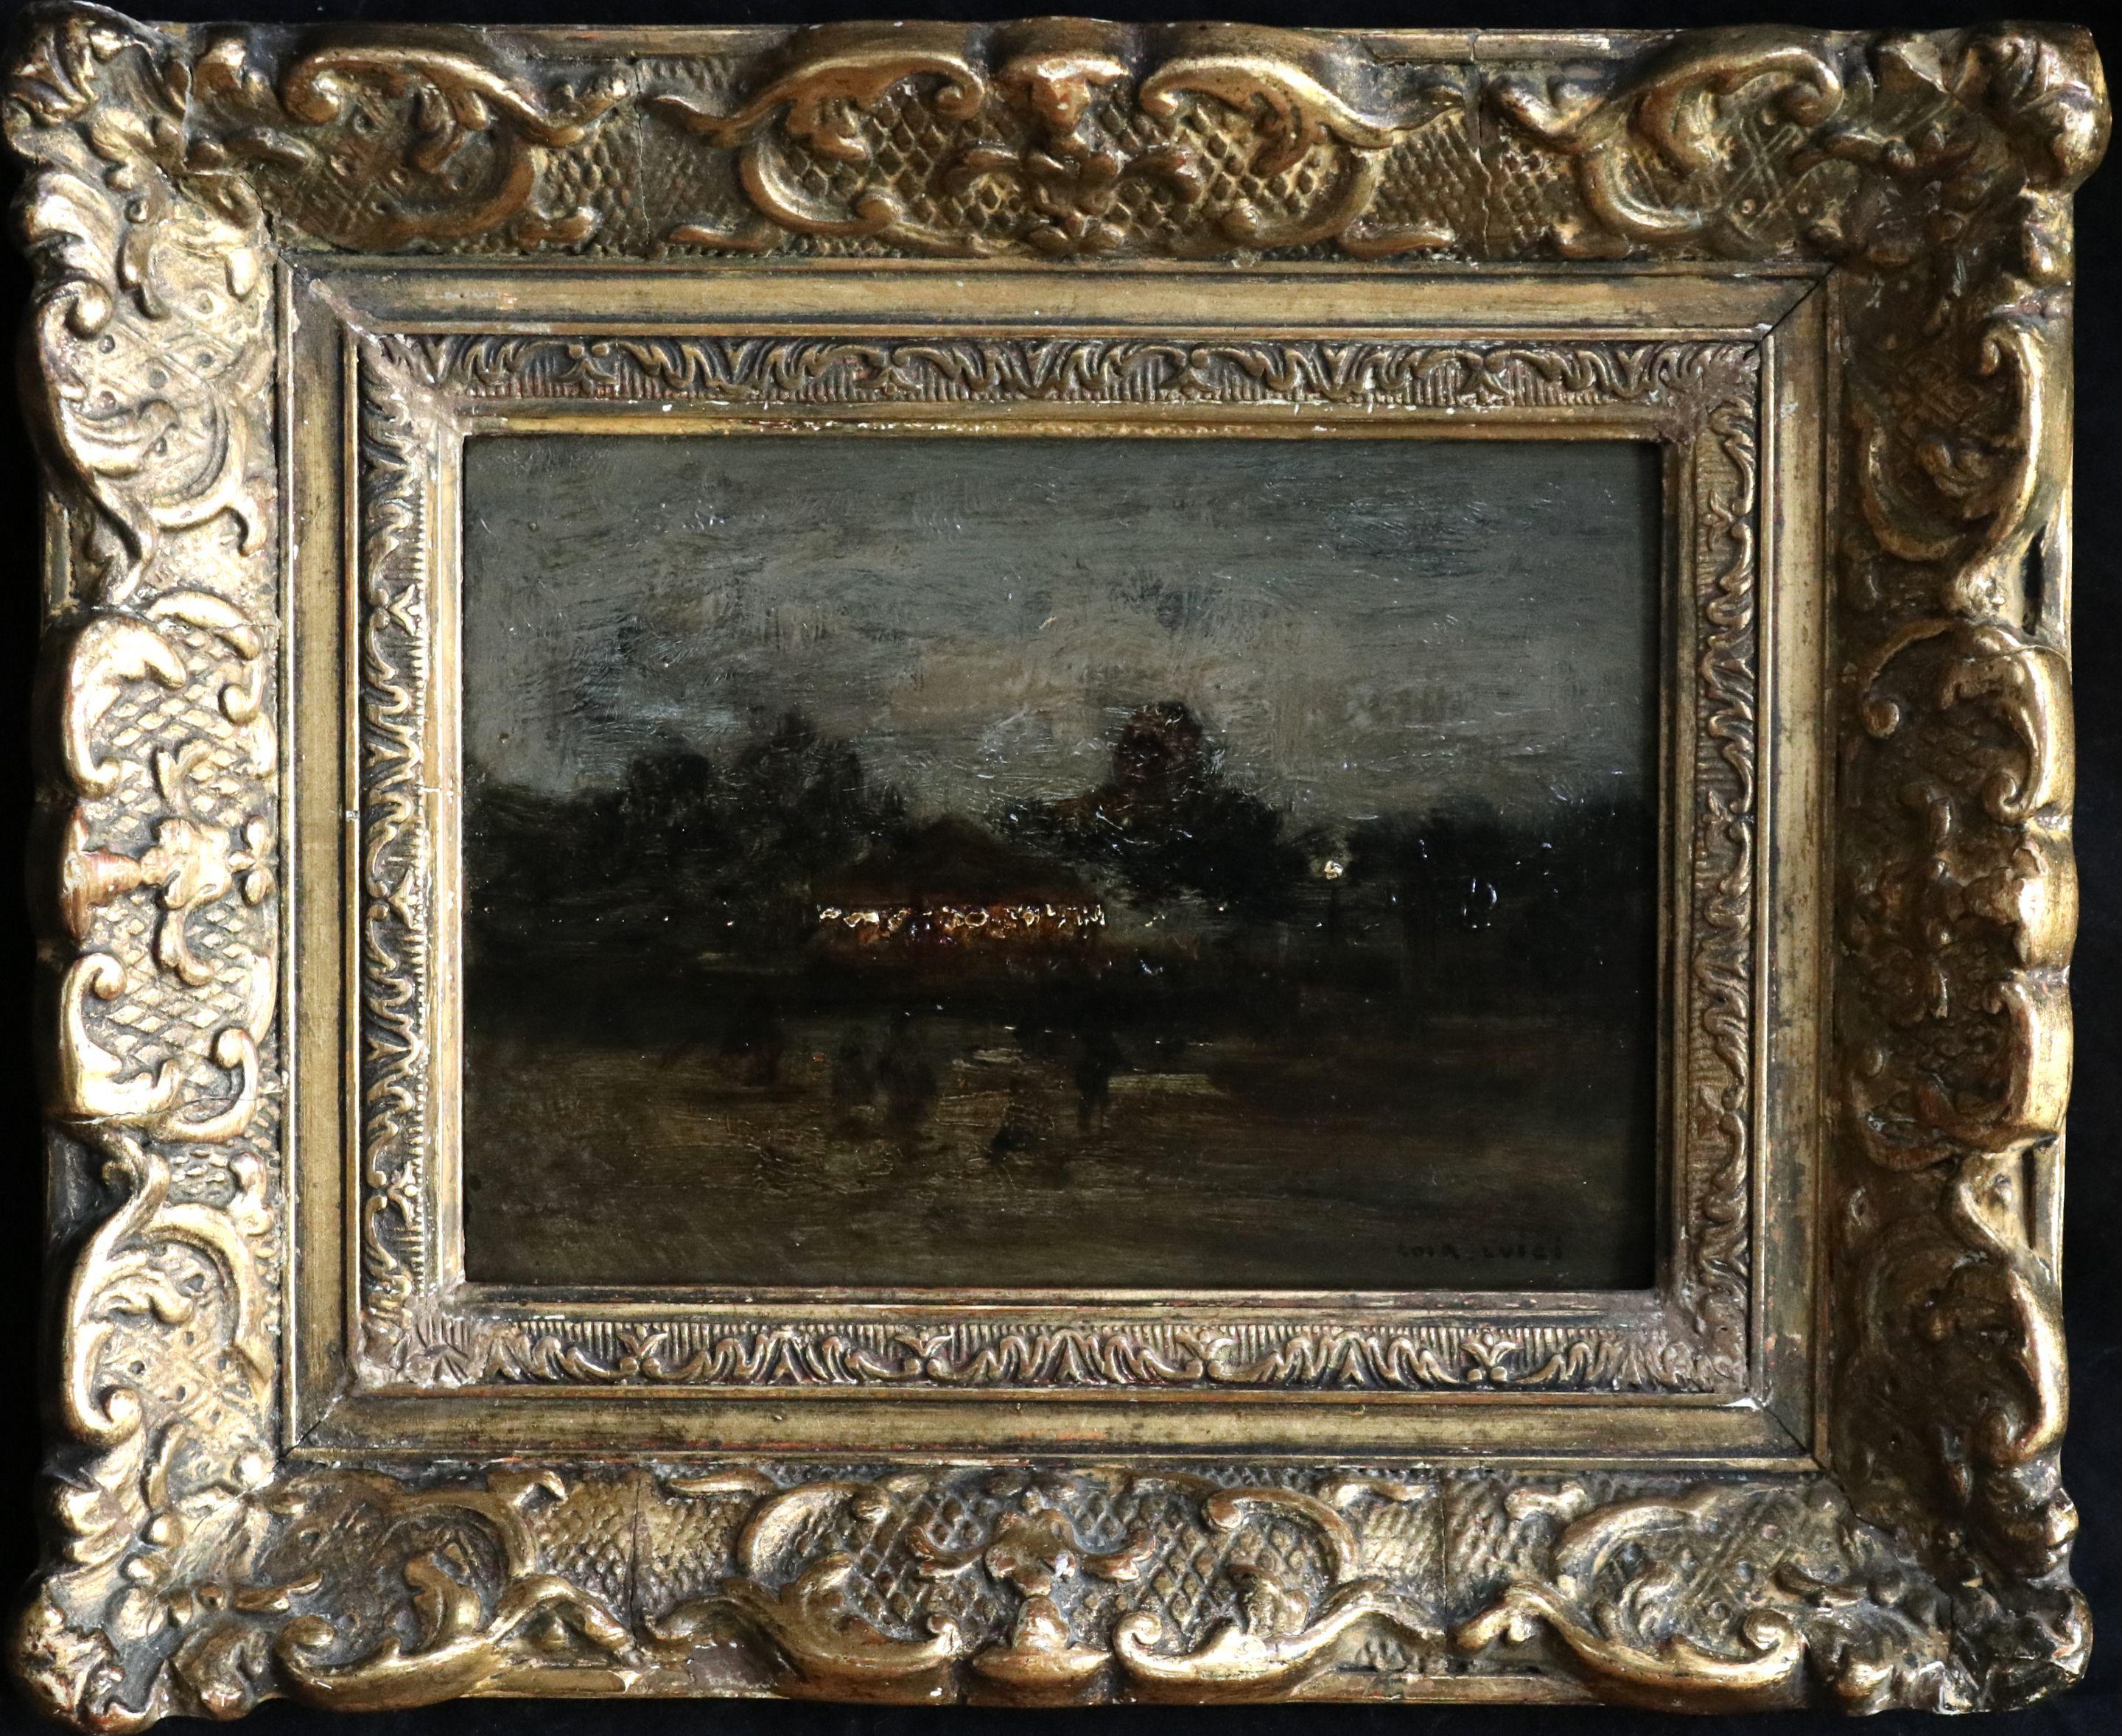 Oil on panel circa 1900 by Luigi Loir. Signed lower right. Framed dimensions are 10 inches high by 12 inches wide.

Luigi Loir enrolled at the school of fine arts in Parma in 1853. Ten years later he went to Paris and worked in the studio of the